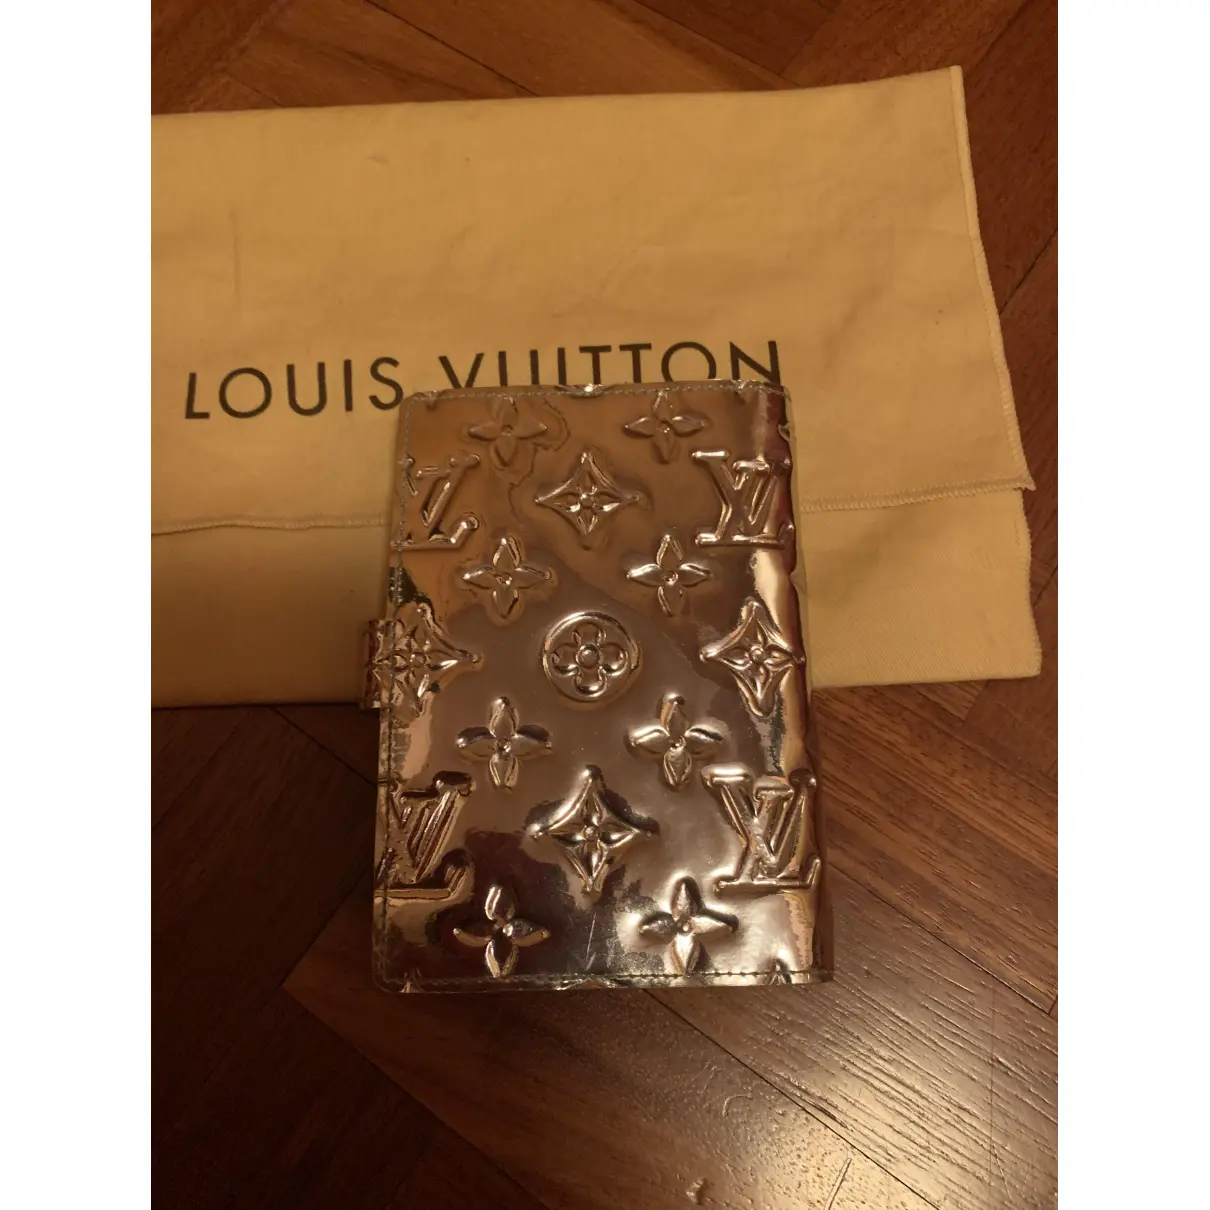 Buy Louis Vuitton Leather diary online